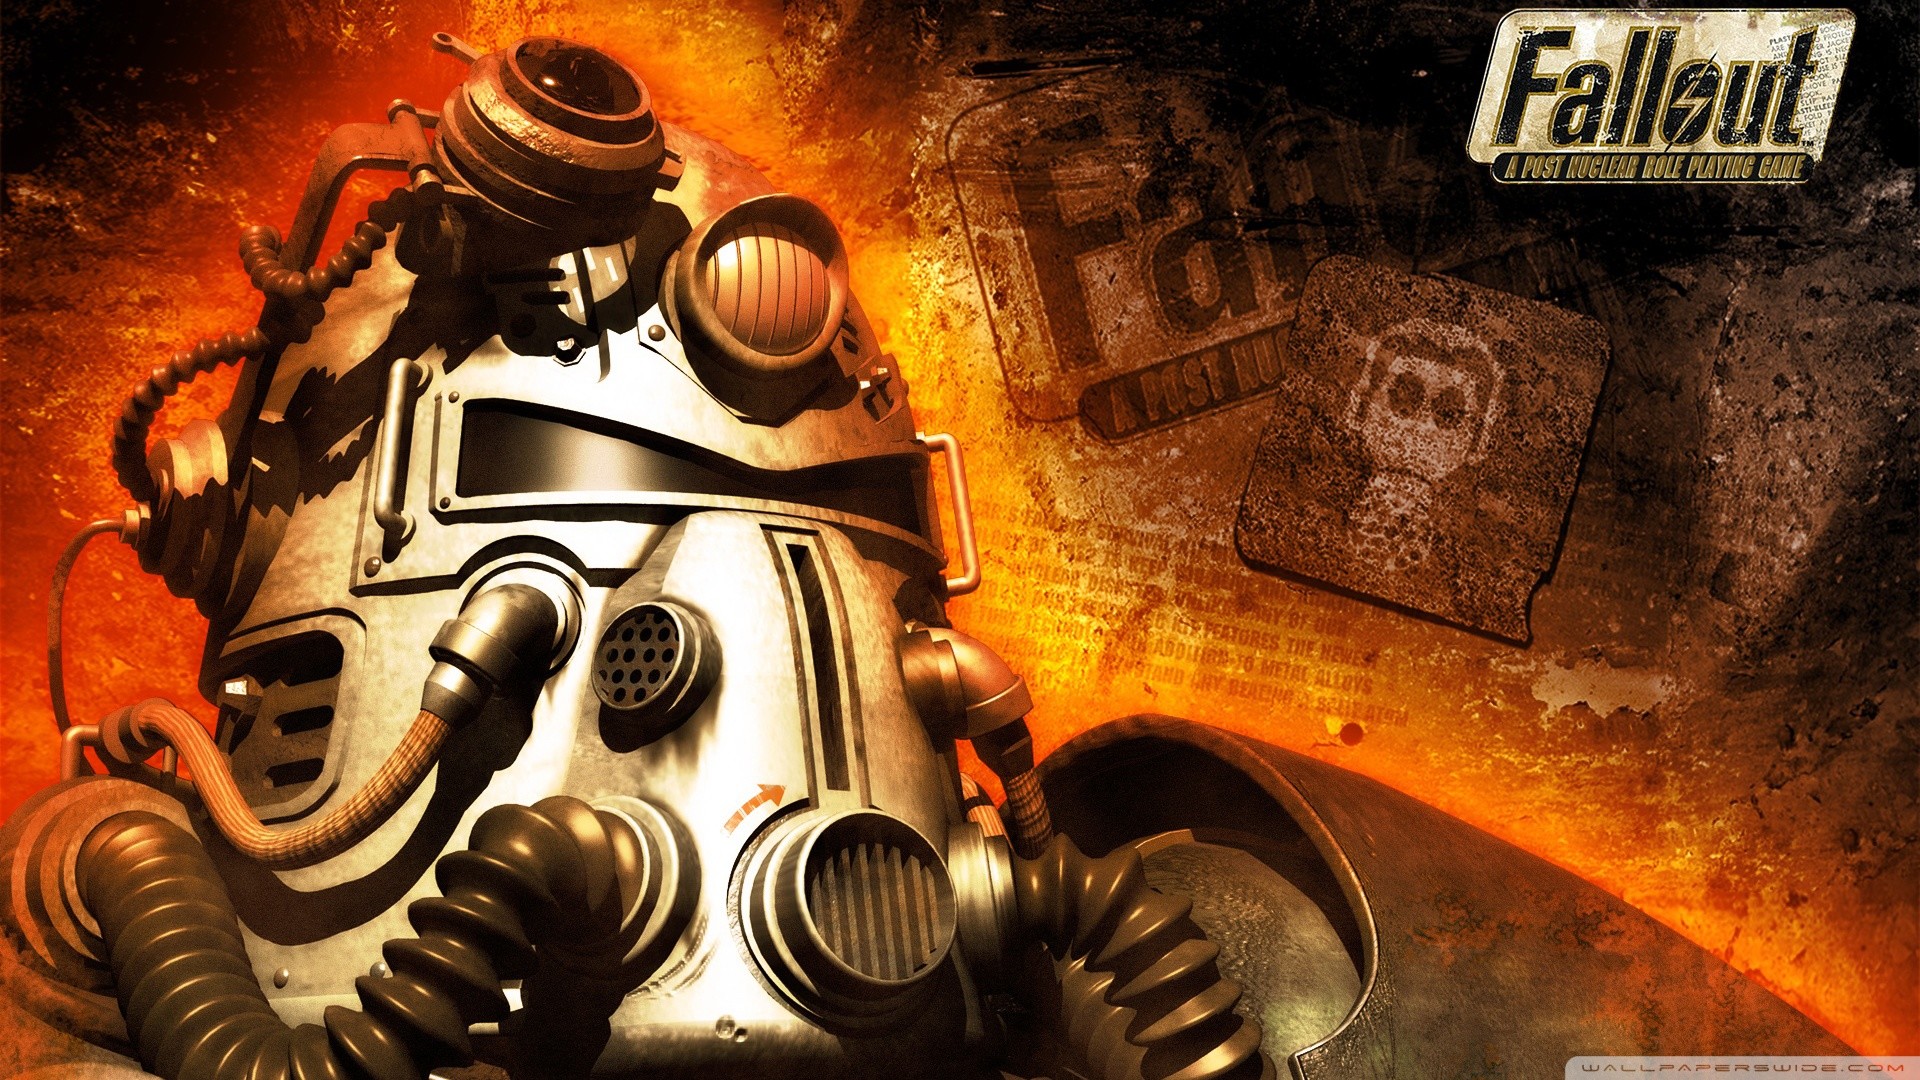 1920x1080 fallout_1-wallpaper--by-acer_9876.  Fallout_3_Brotherhood_of_Steel_Exploding_HD_Wallpaper_Vvallpaper.